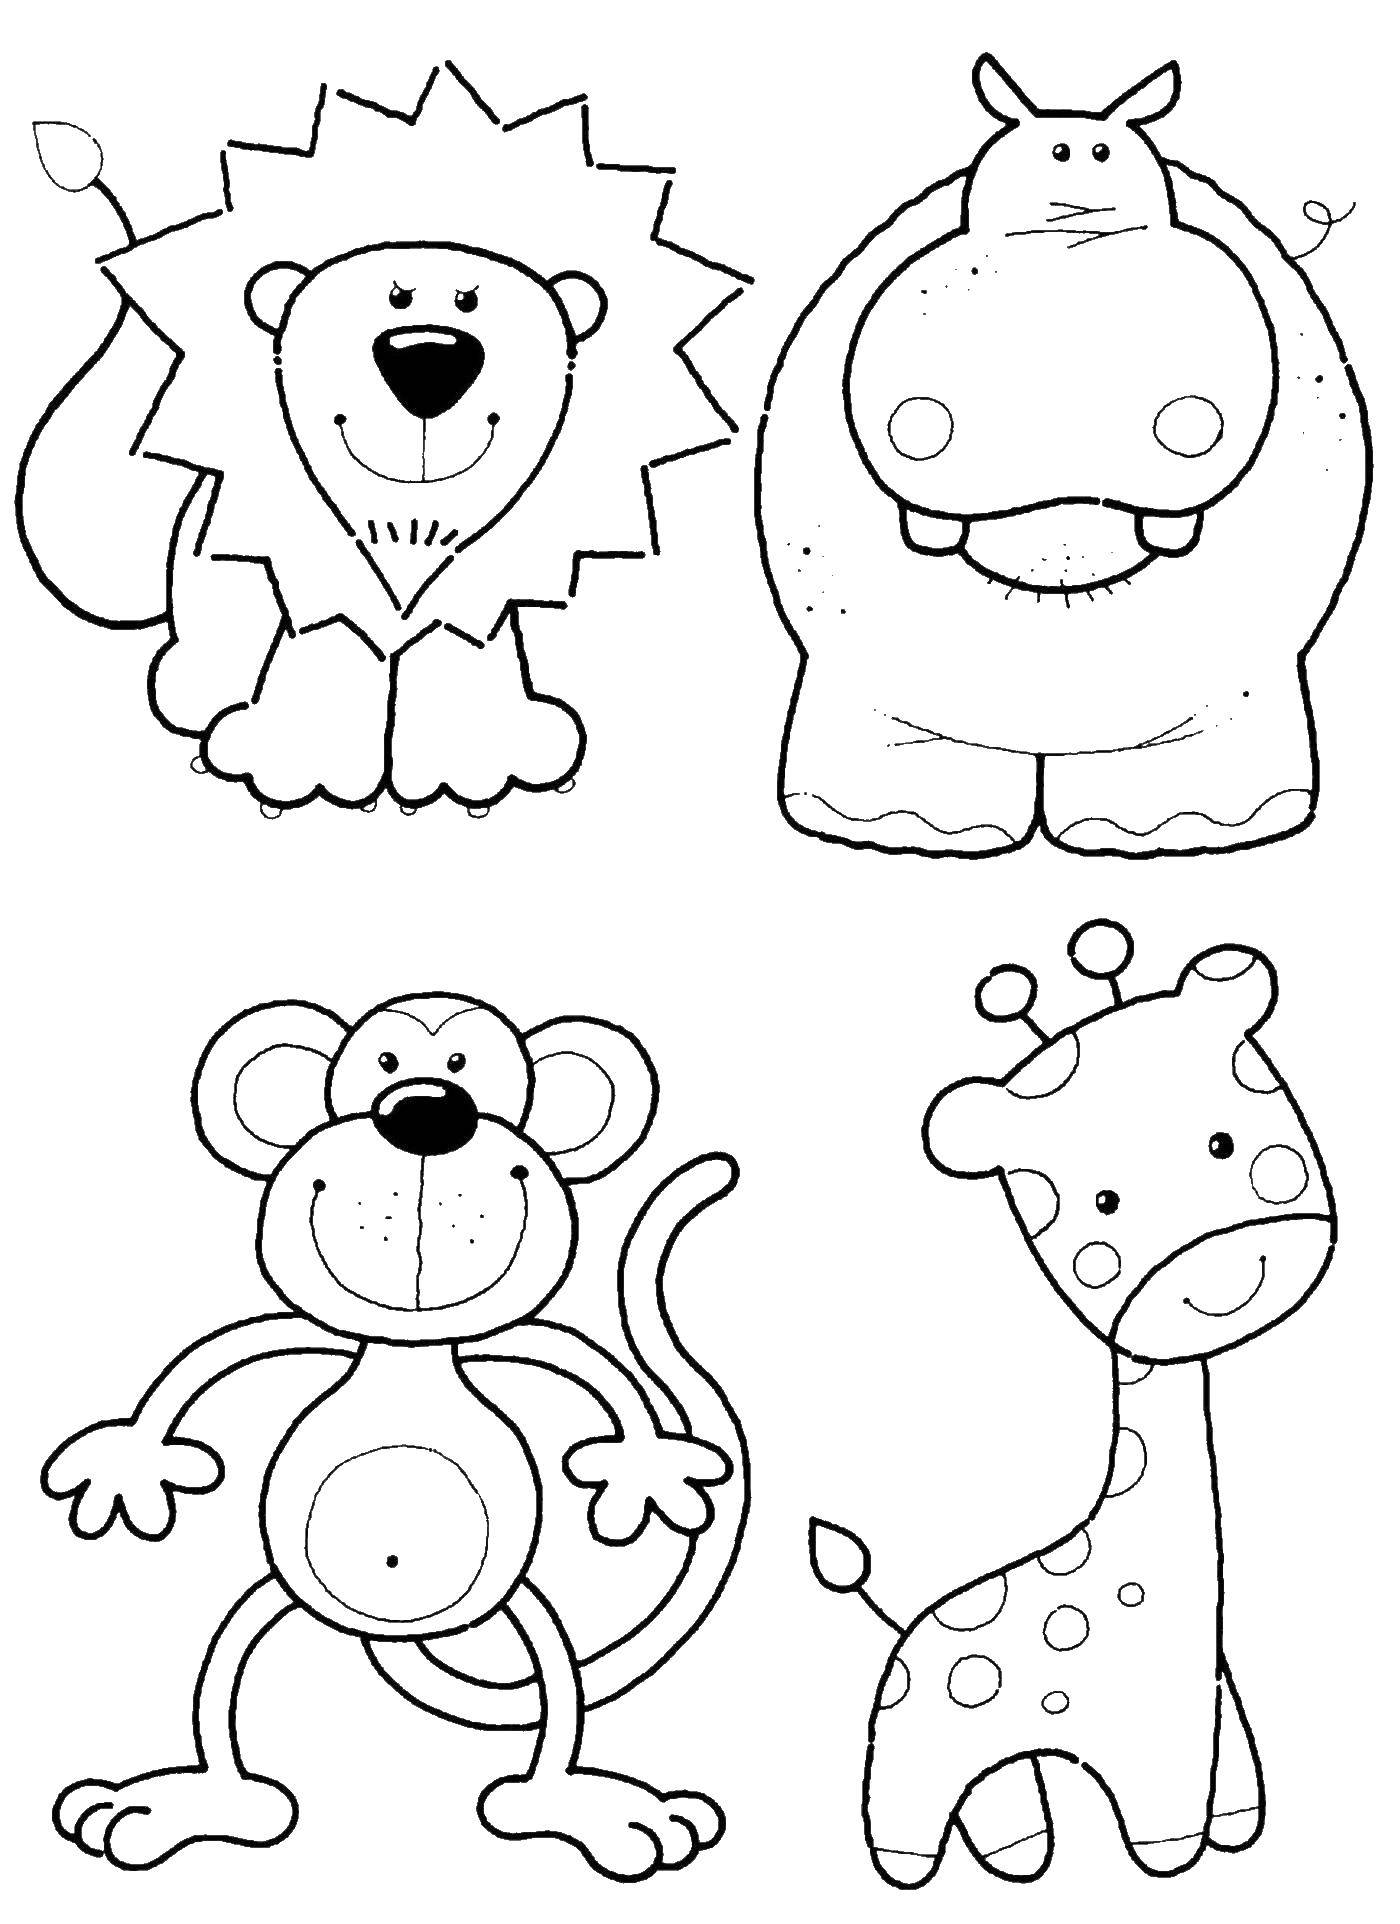 Coloring Lion, Hippo, monkey and ... ... best friends. Category animals. Tags:  Animals, lion, monkey, Hippo, giraffe.